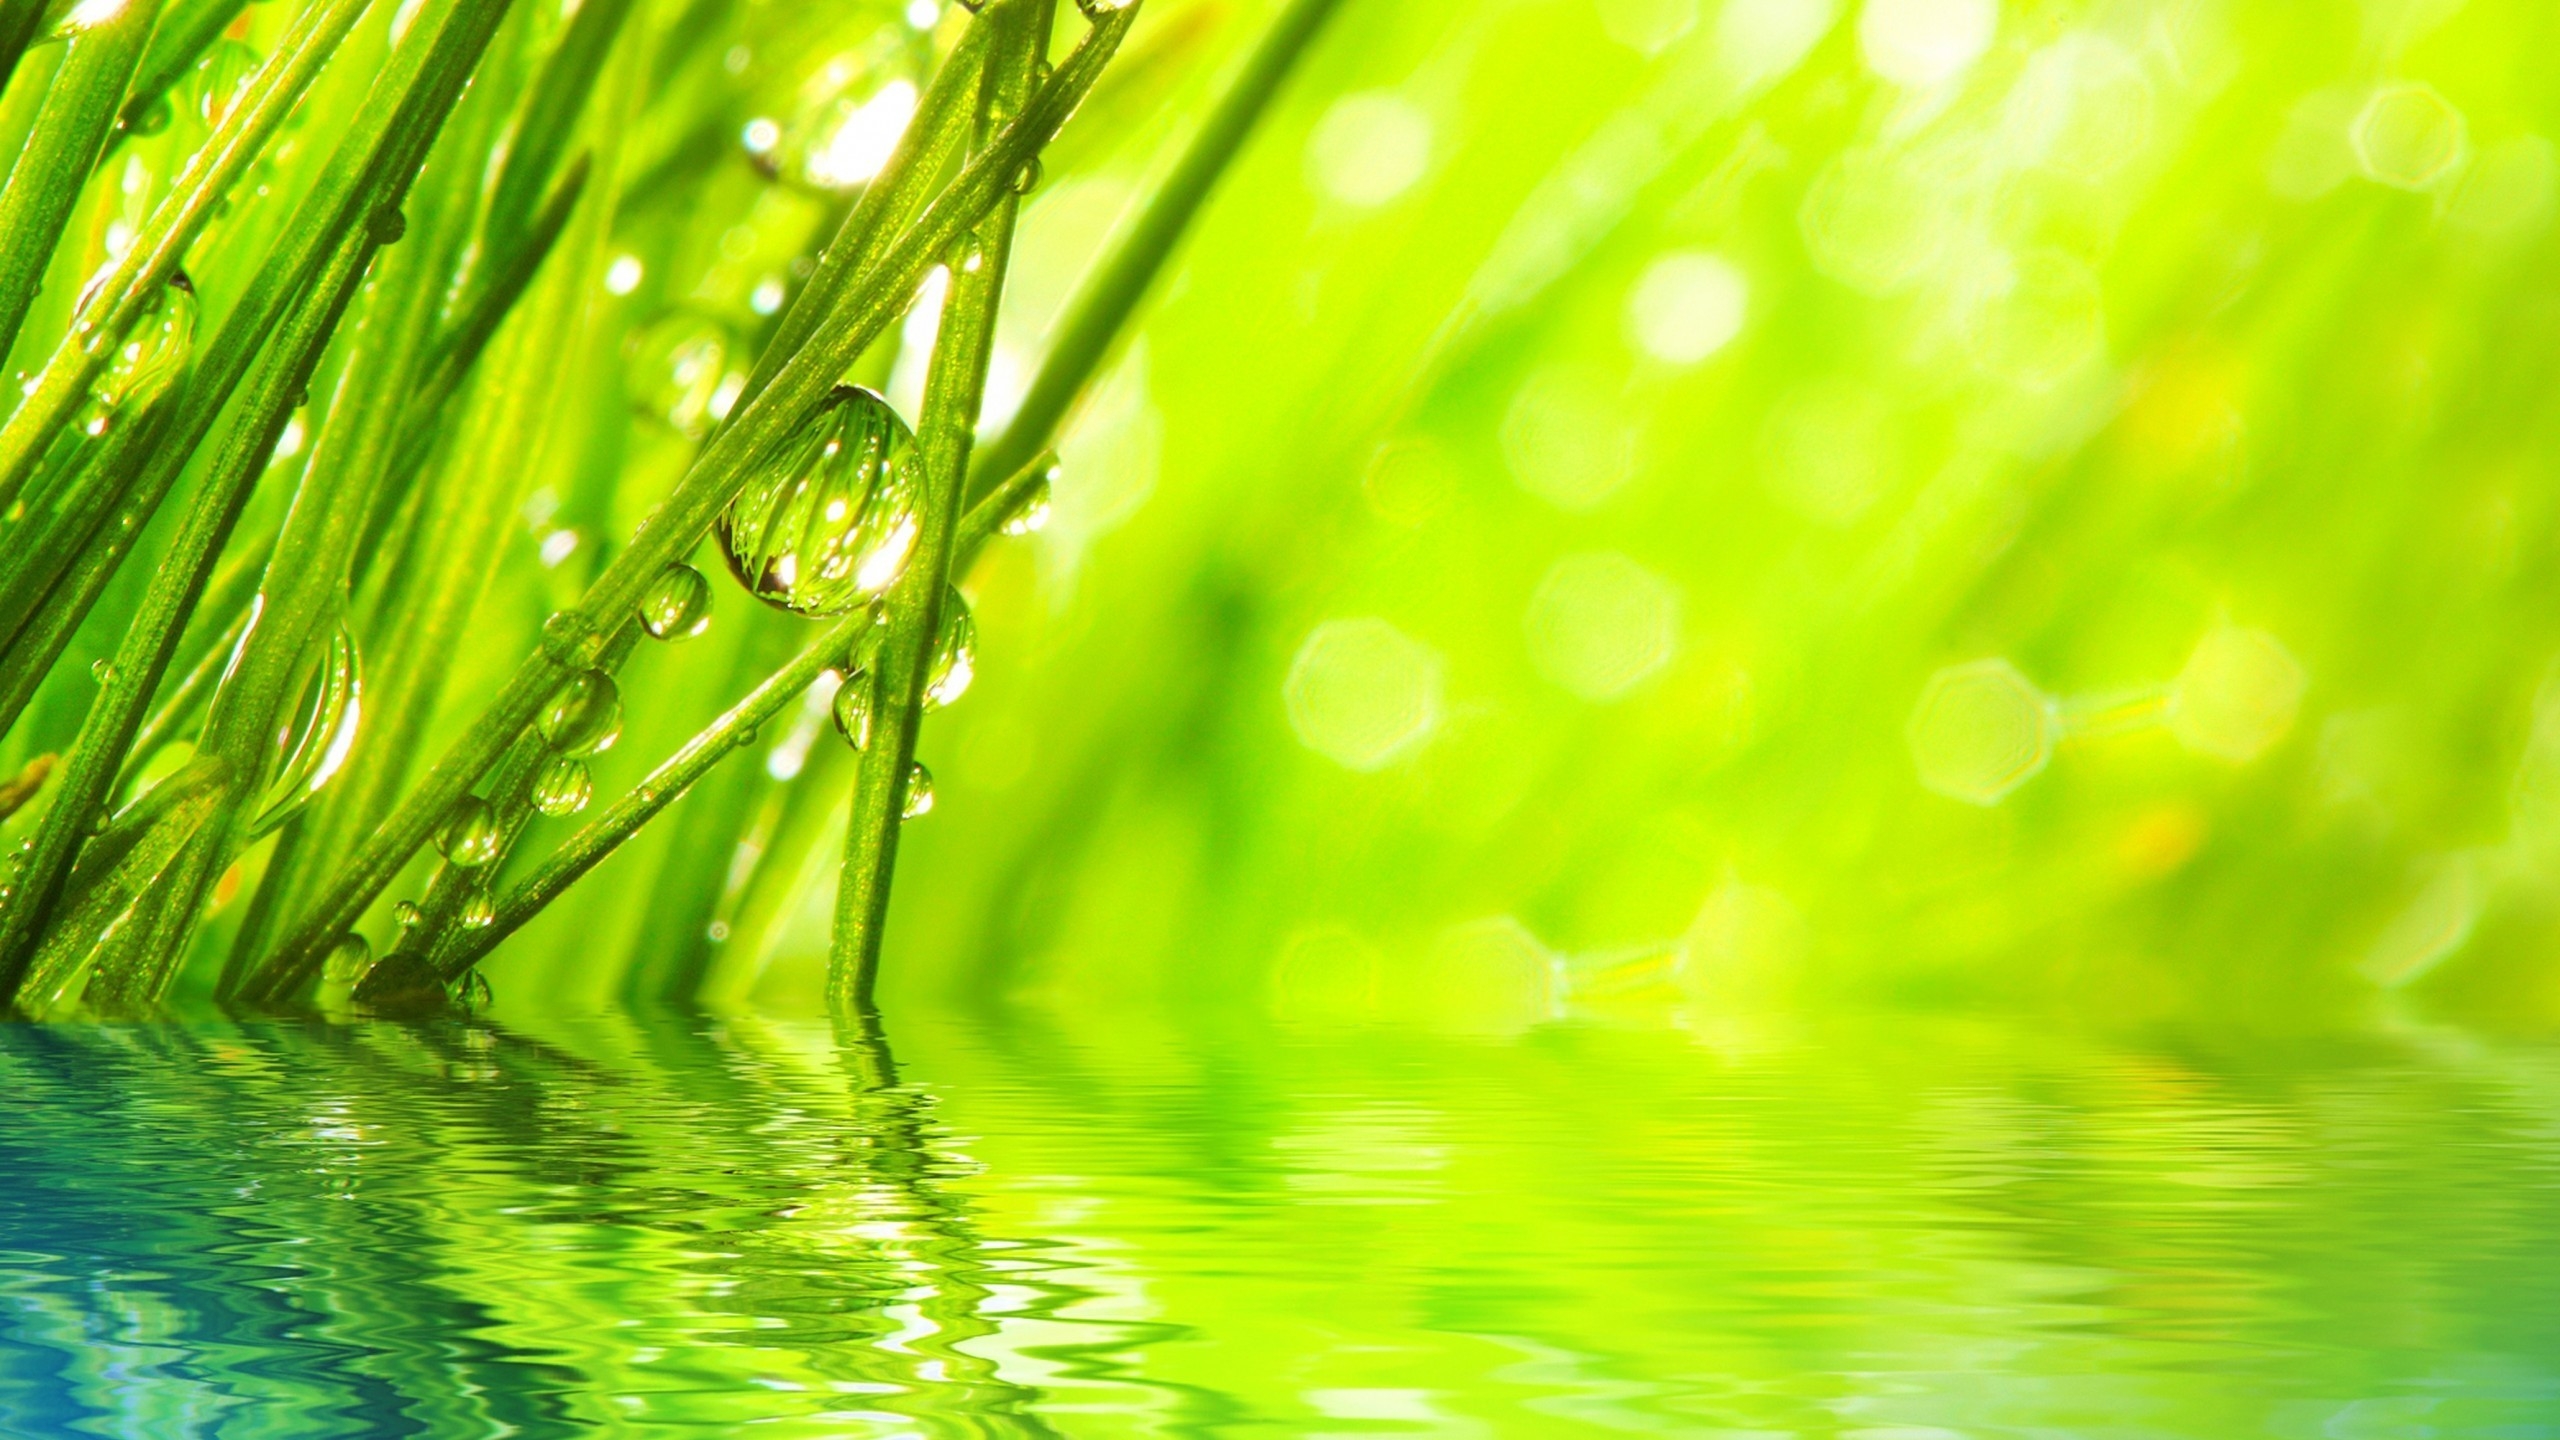 Water Drops on Grass for 2560x1440 HDTV resolution